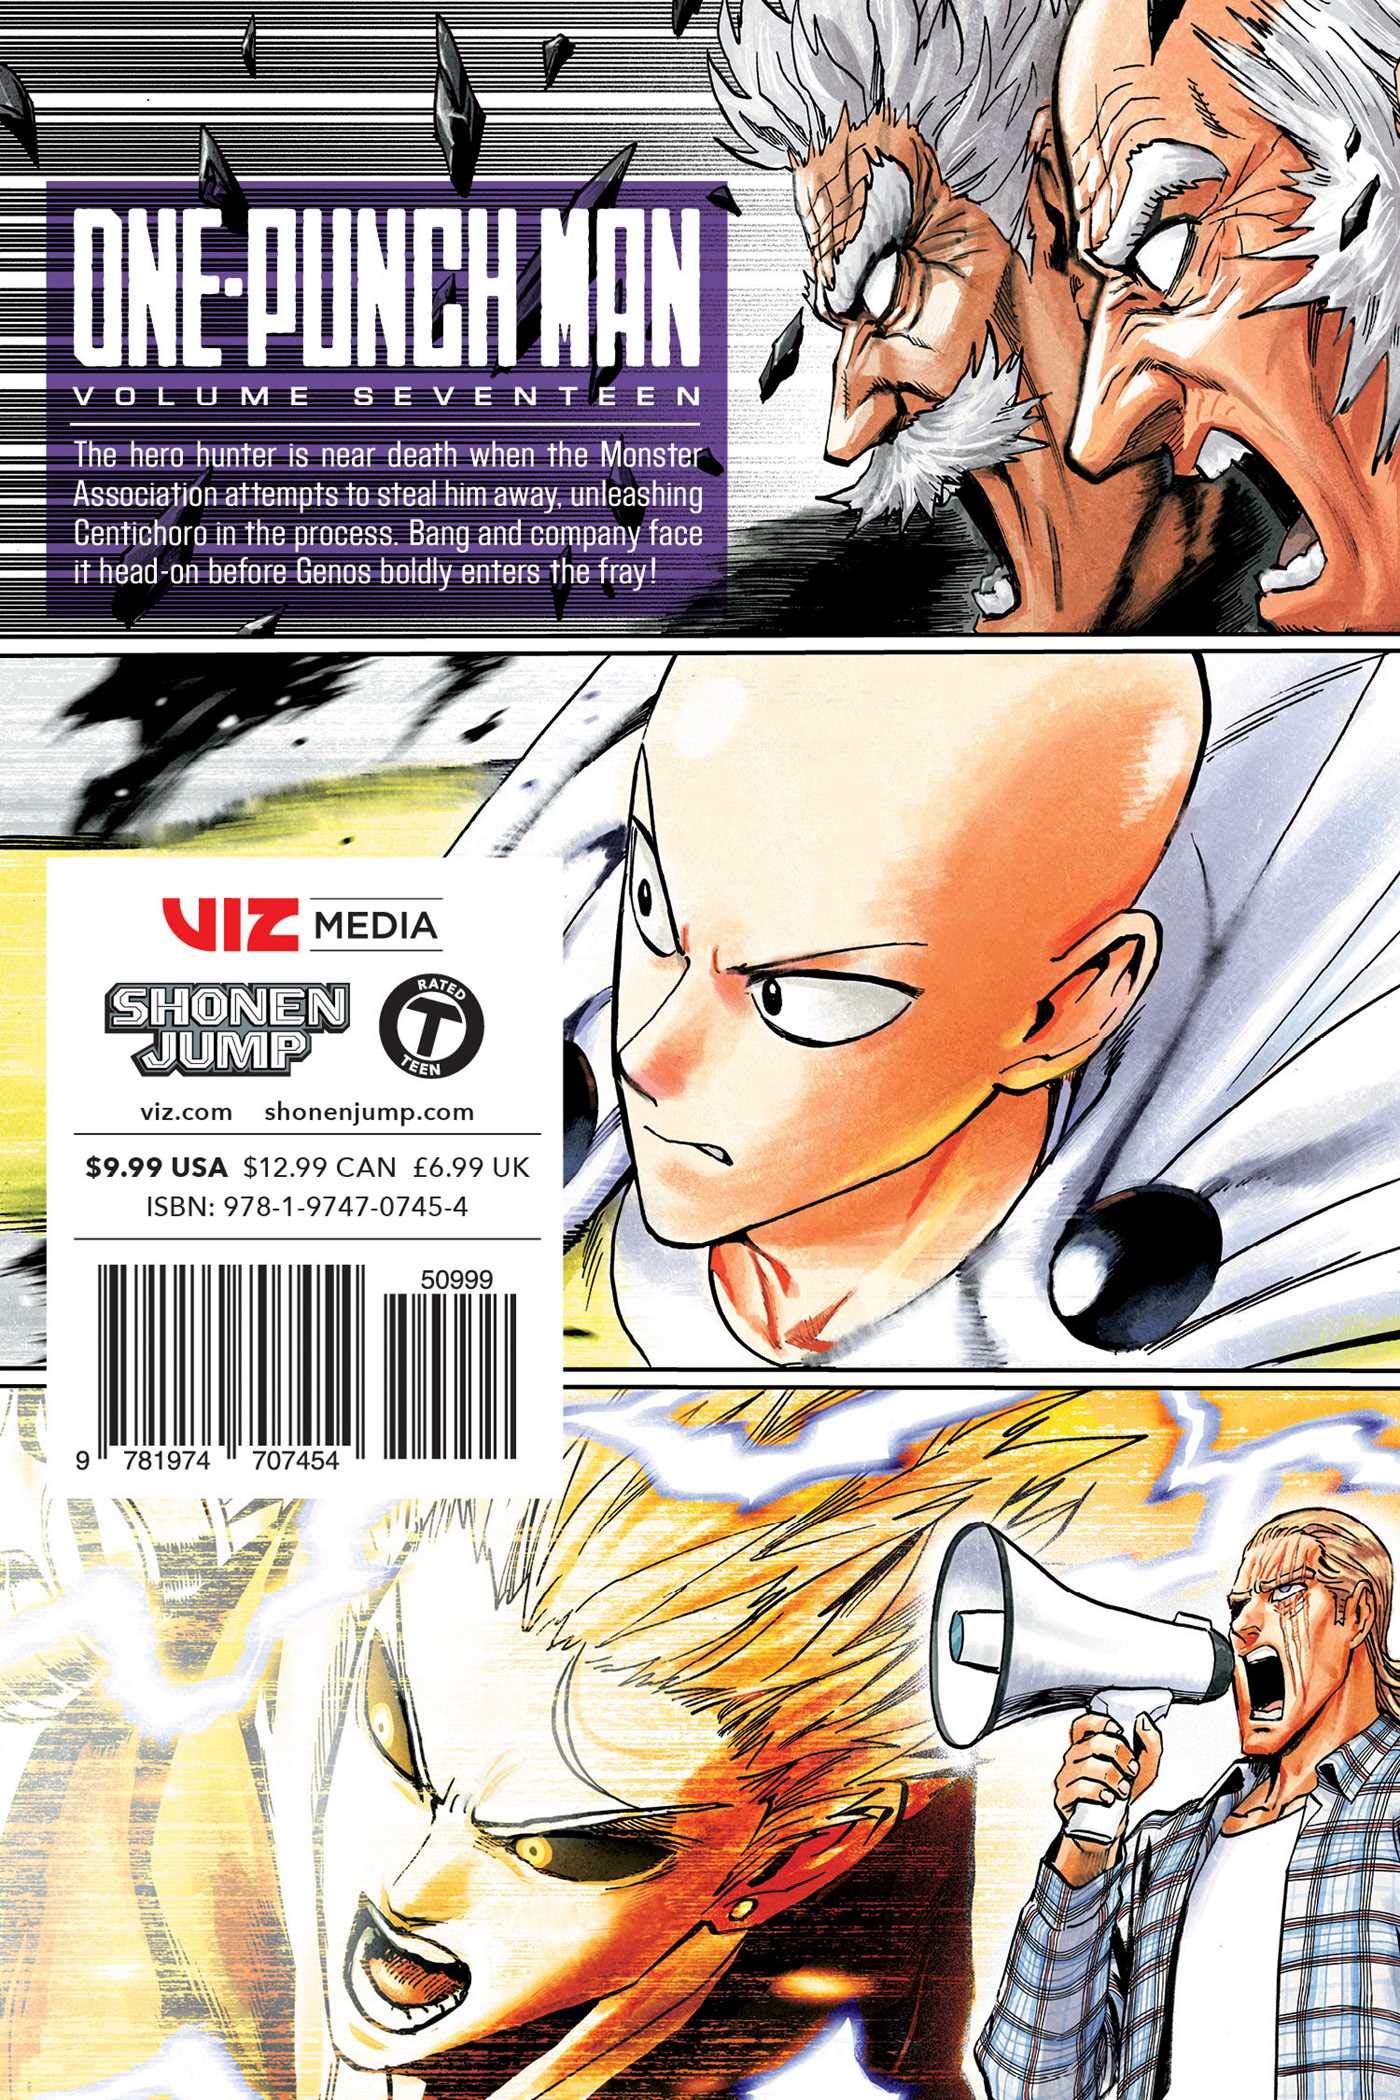 One Punch Man-Capitulo 1(Volume 1)